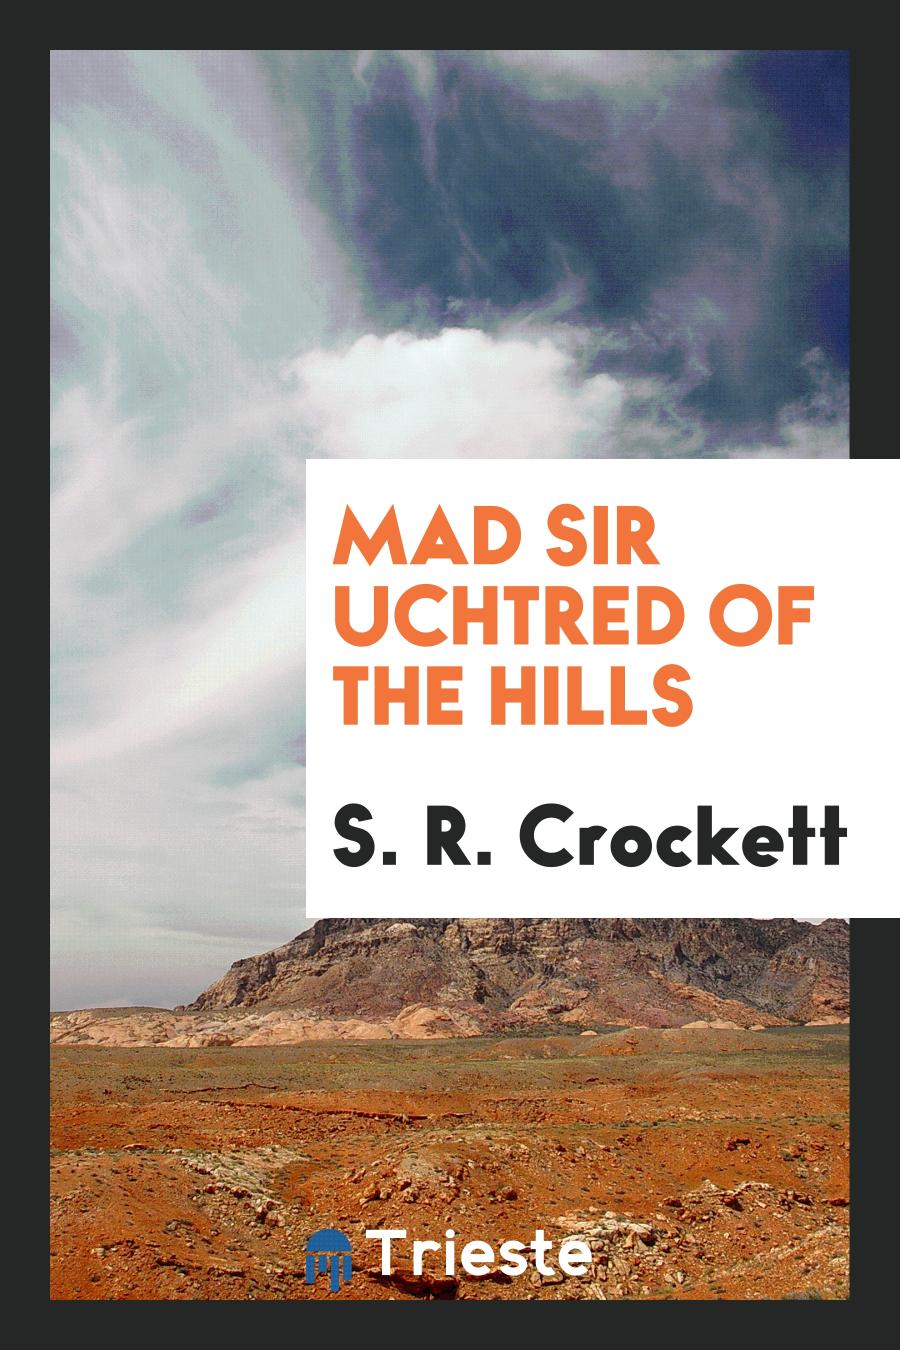 Mad Sir Uchtred of the hills